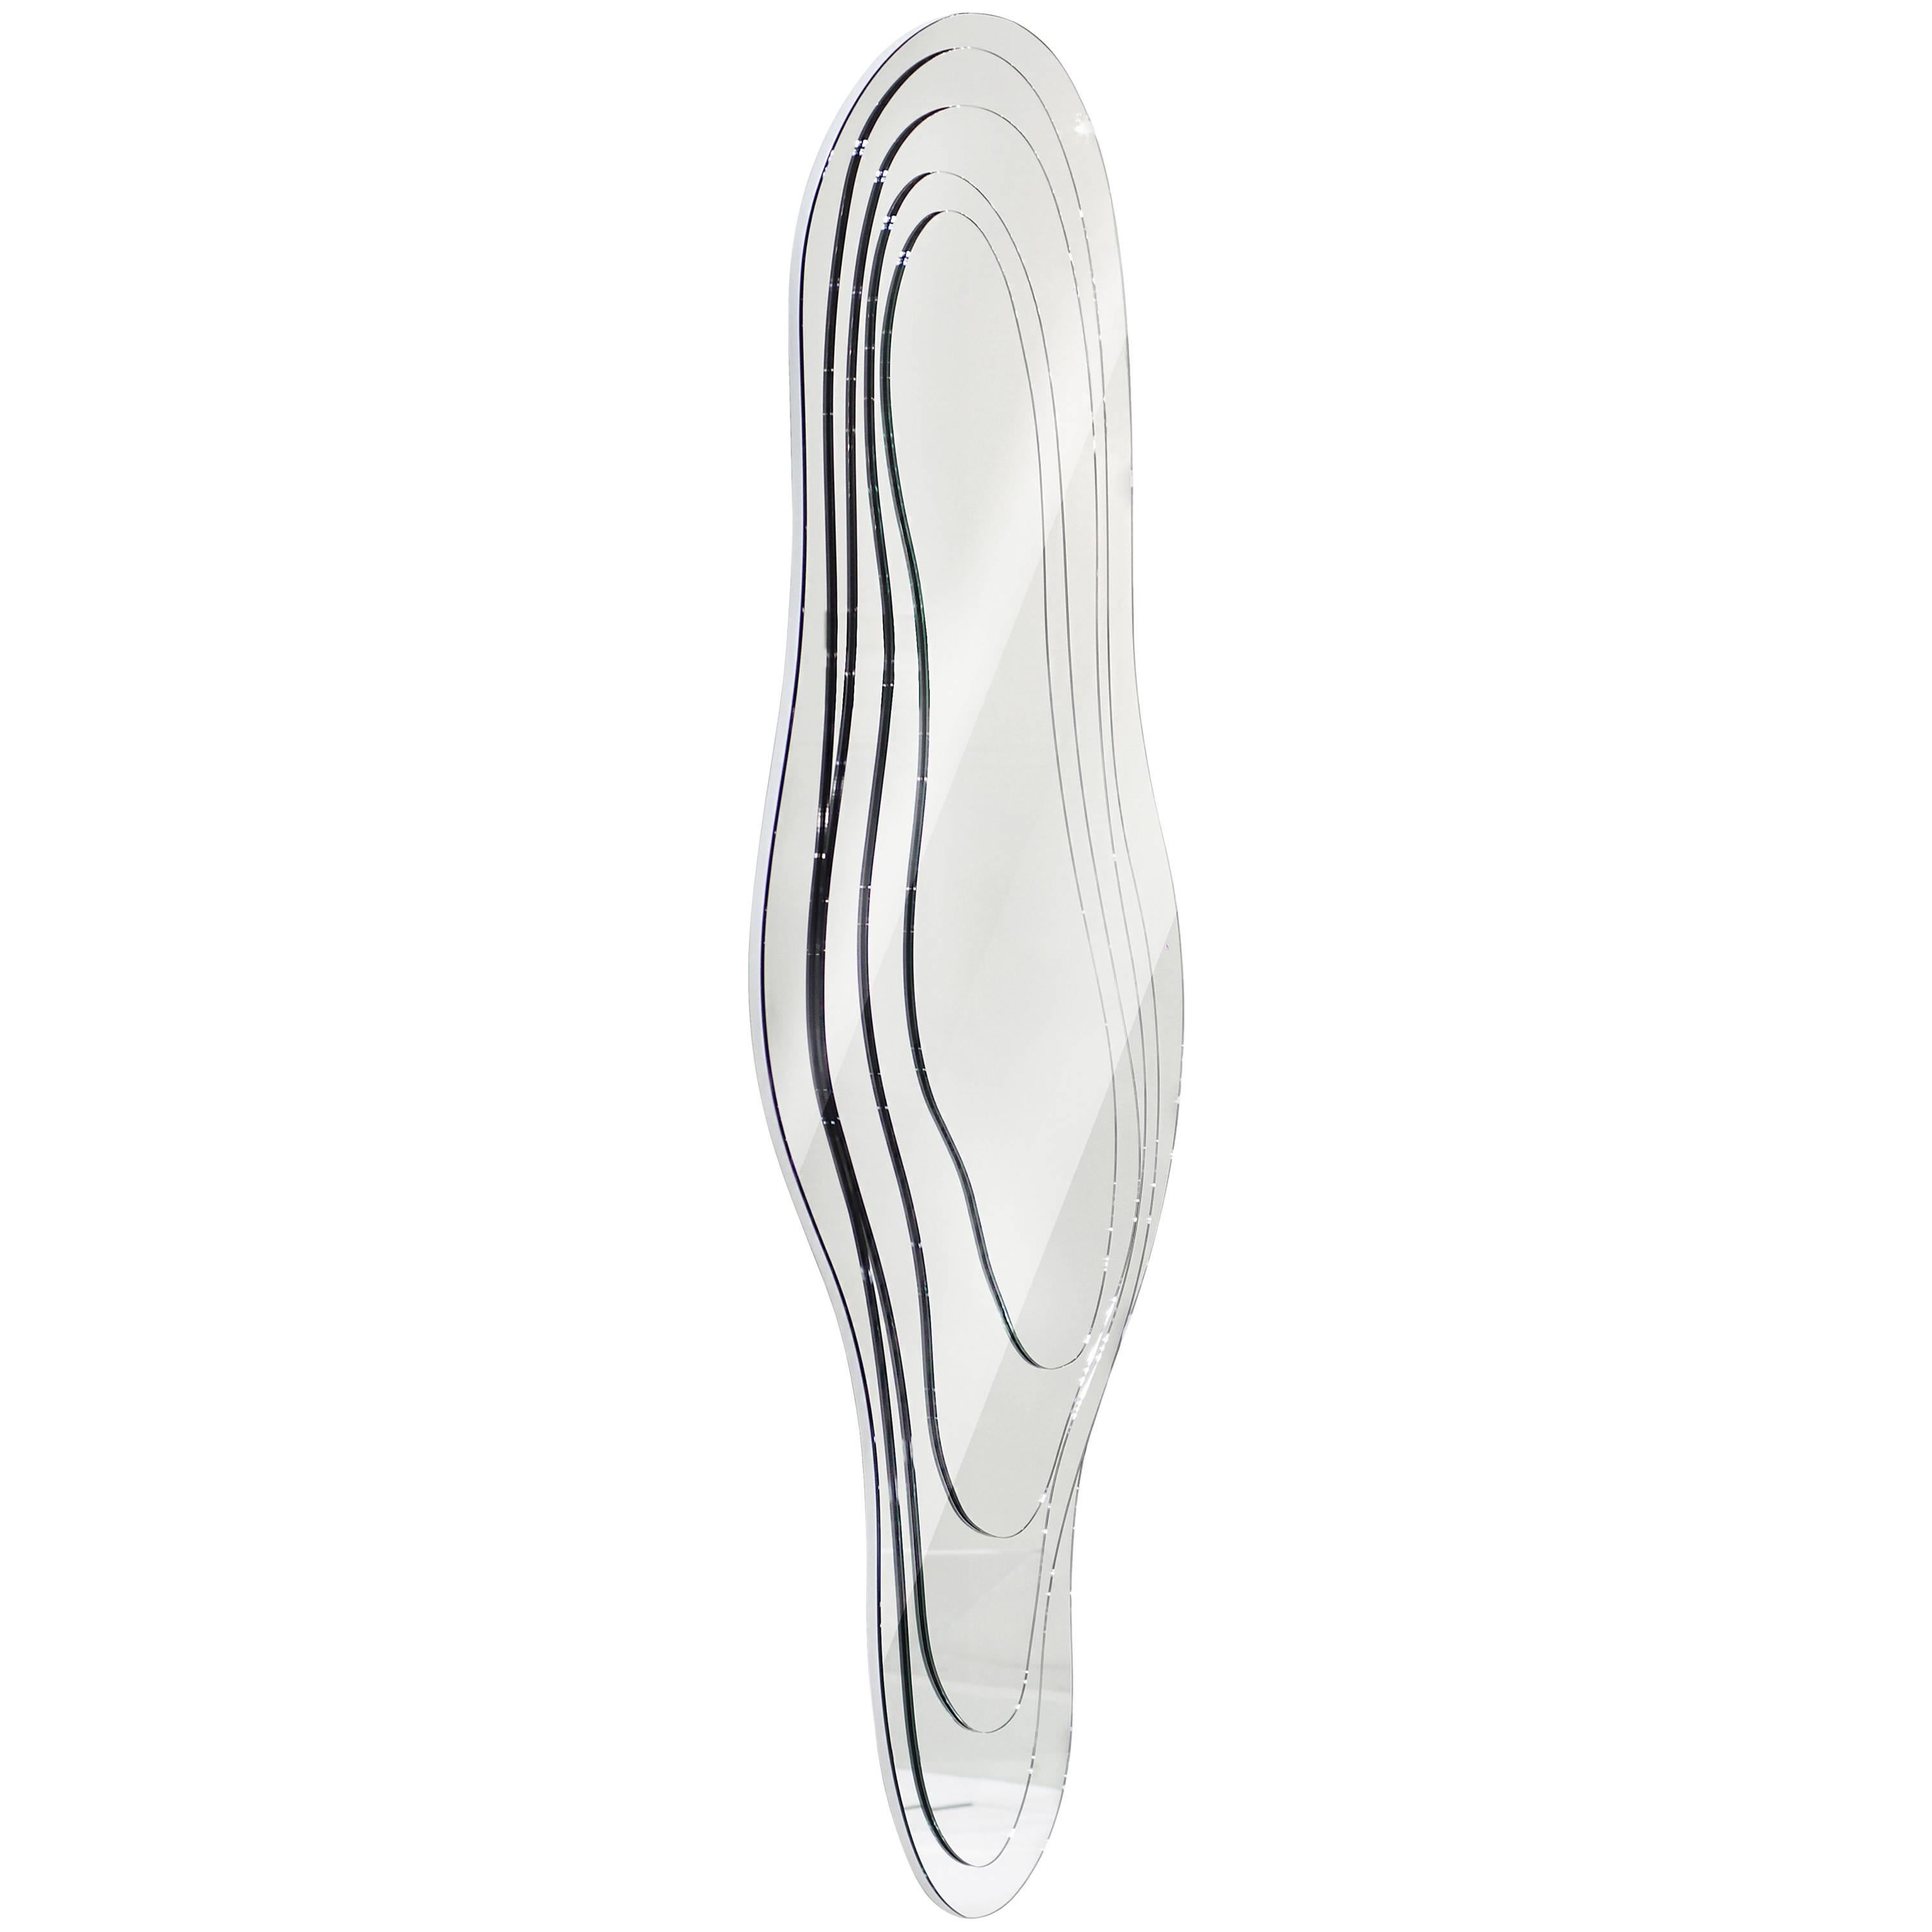 Wall Full-Length Mirror Curved Design Limited Edition Contemporary Made in Italy For Sale